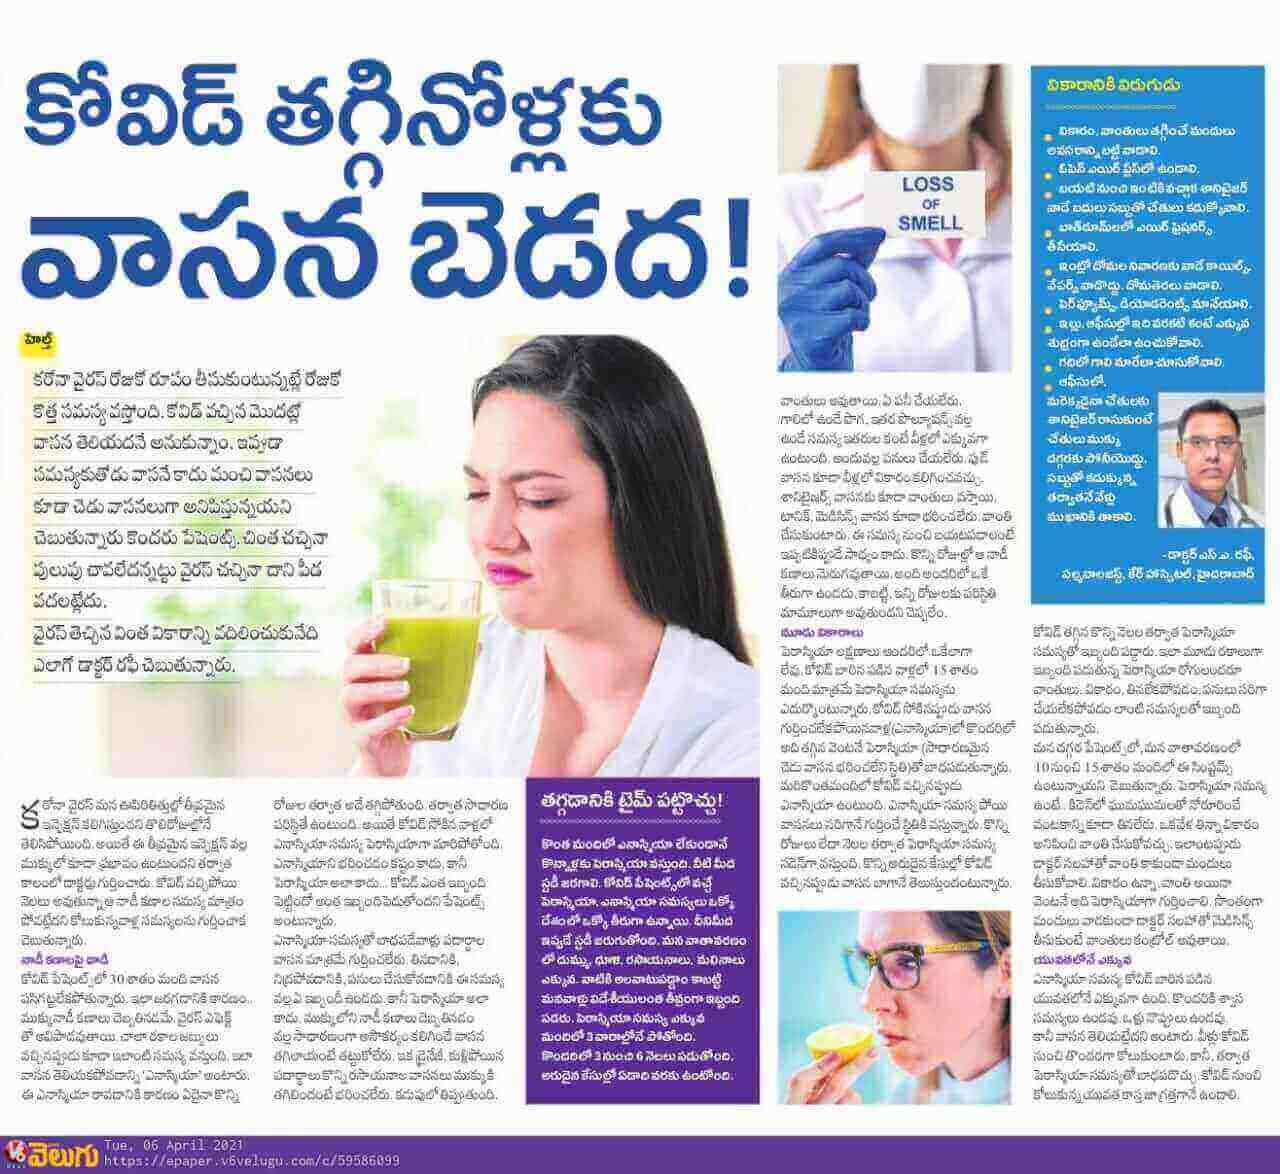 Article on Loss of Smell by  Dr. S A Rafi - Consultant Pulmonologist